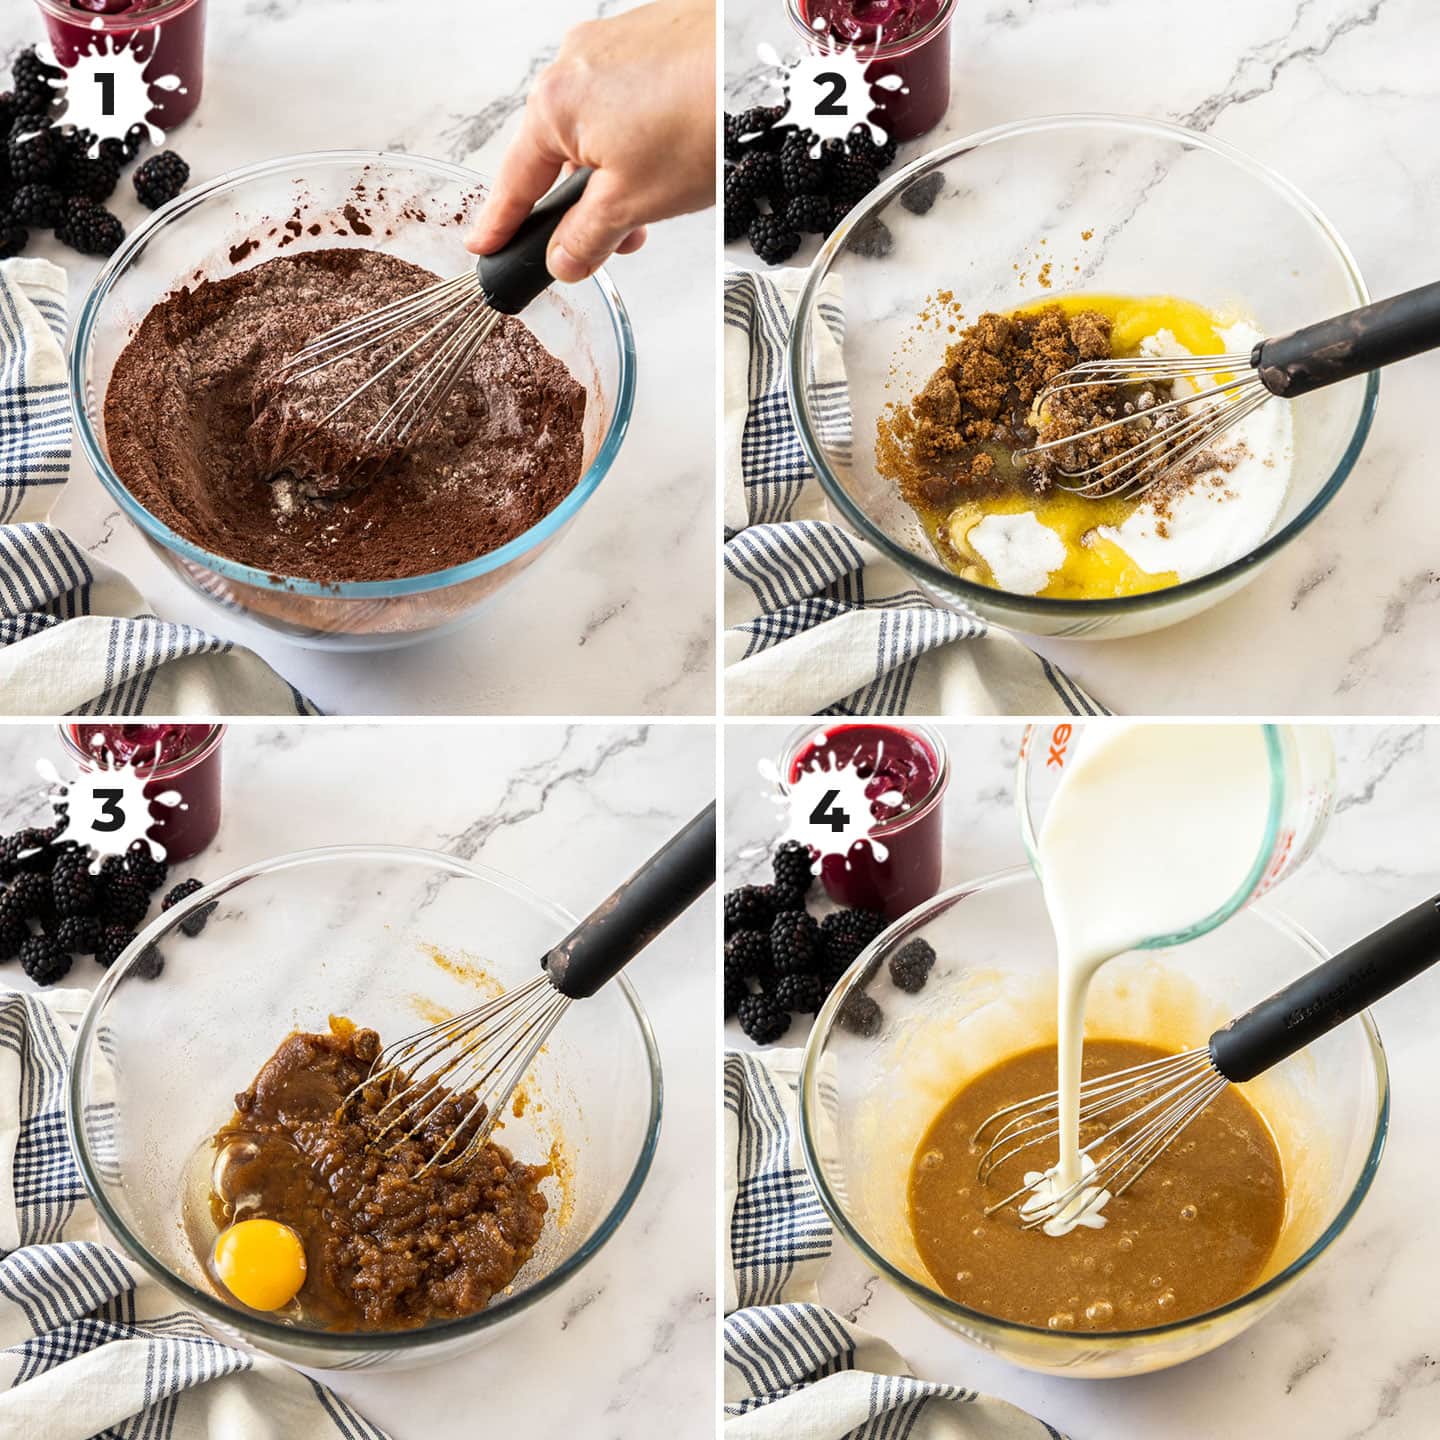 4 images showing the batter for chocolate cake